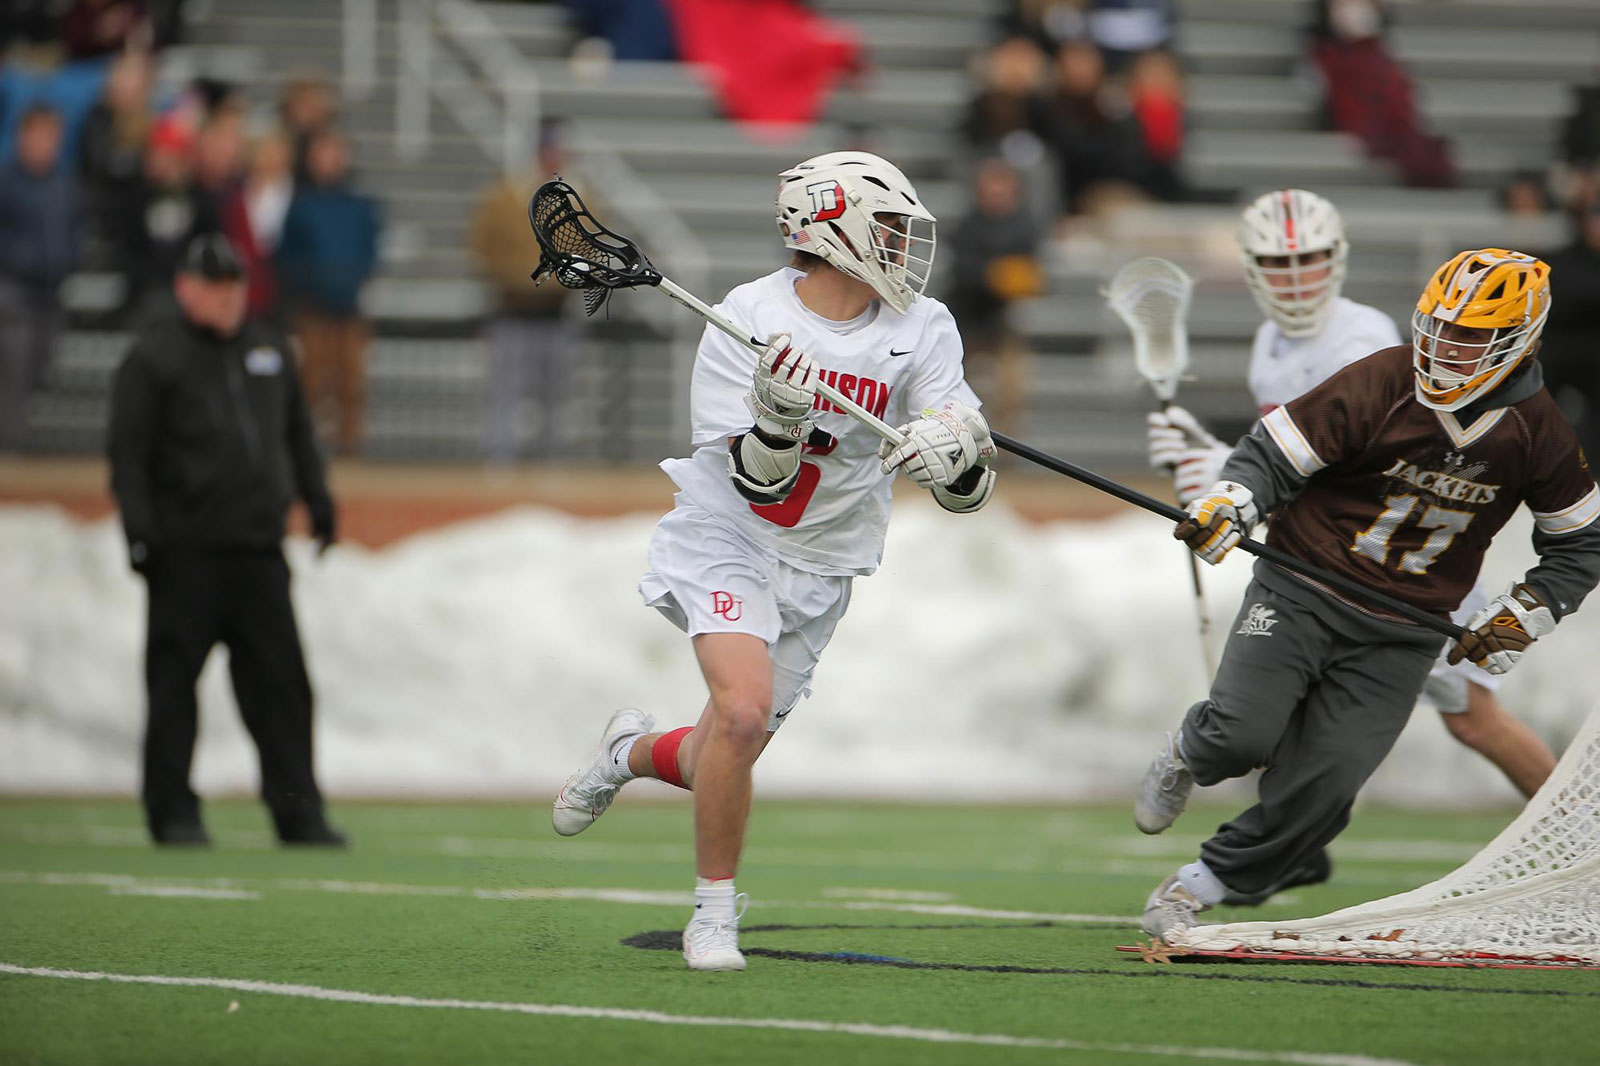 Lacrosse player Luke Fisher was a starter on the Big Red’s conference championship team in 2022 and ranked fourth in the NCAC with 66 points.  (Credit: Jace Delgado)